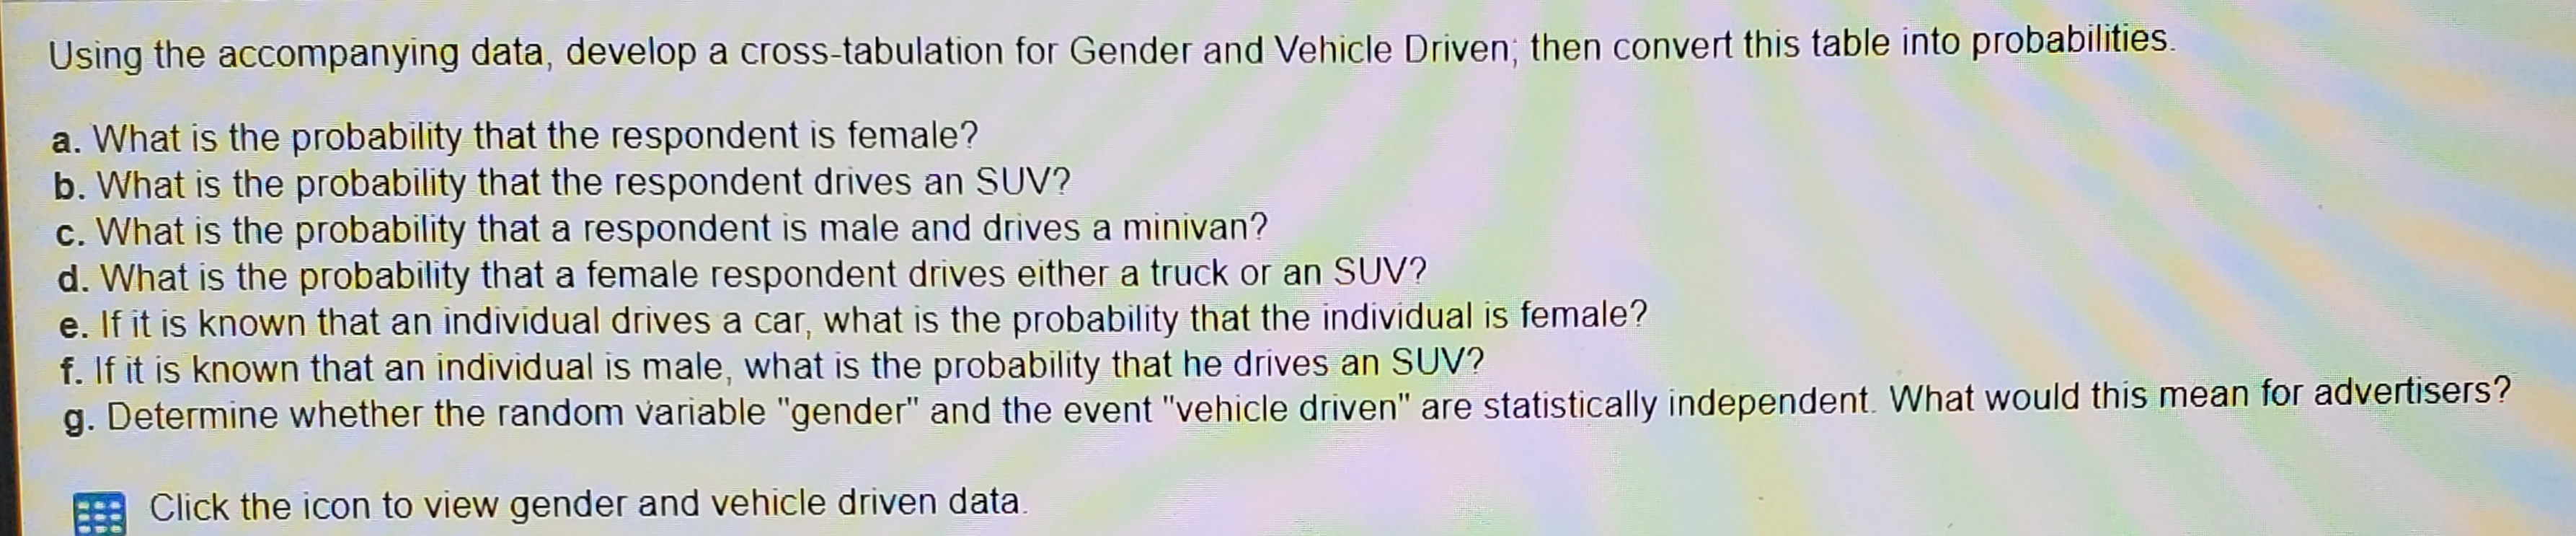 a. What is the probability that the respondent is female?
b. What is the probability that the respondent drives an SUV?
c. What is the probability that a respondent is male and drives a minivan?
